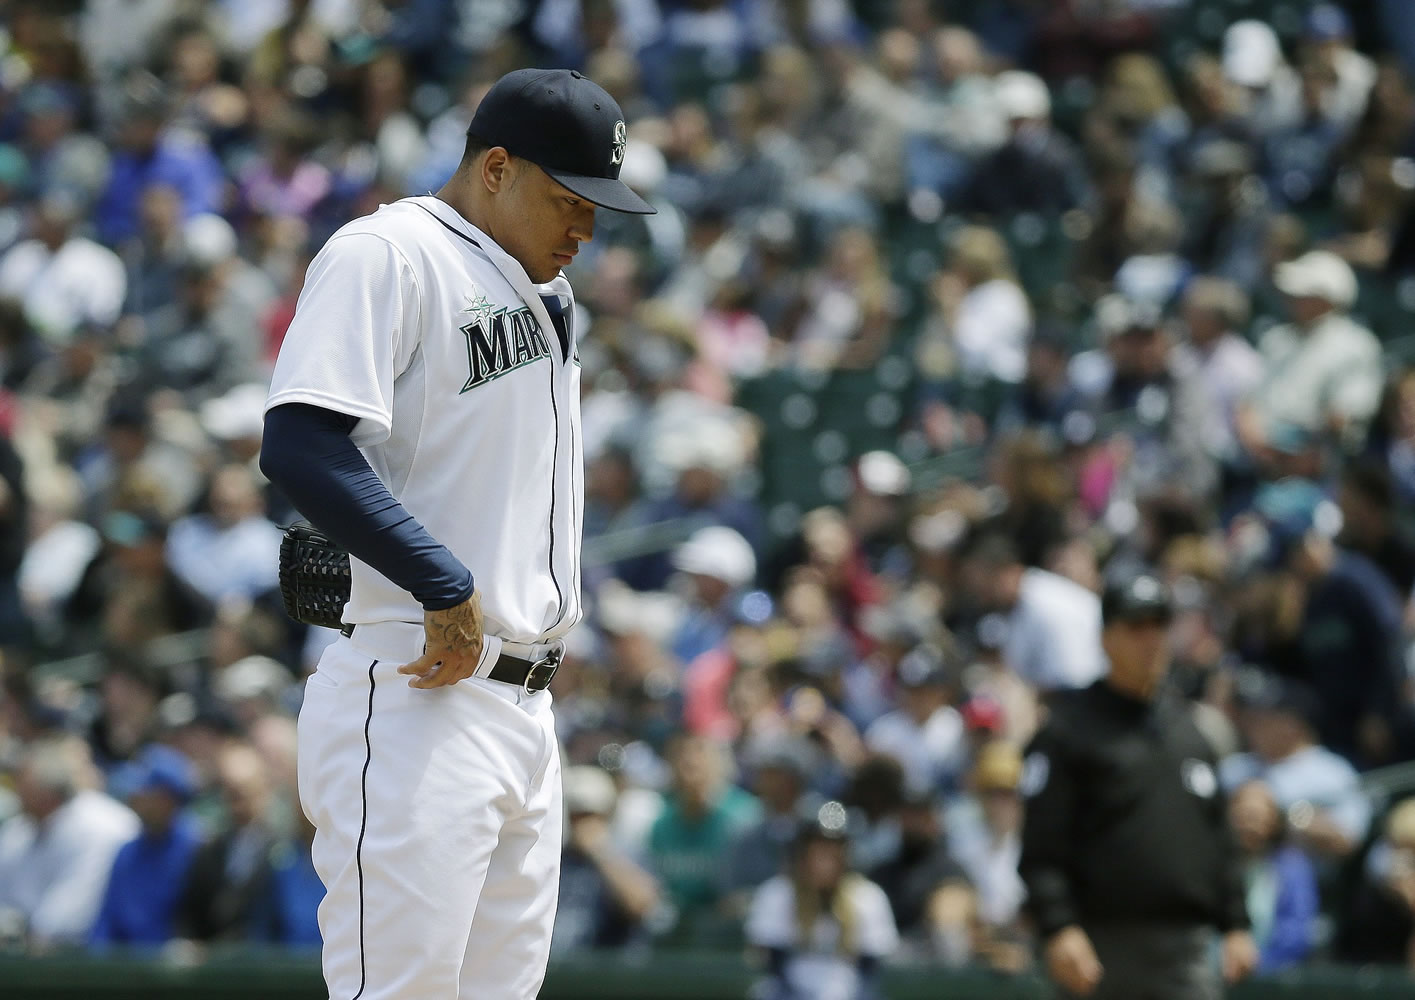 Seattle Mariners starting pitcher Taijuan Walker composes himself on the mound after he gave up a two-run home run to New York Yankees' Brian McCann in the fourth inning of a baseball game, Wednesday, June 3, 2015, in Seattle. (AP Photo/Ted S.